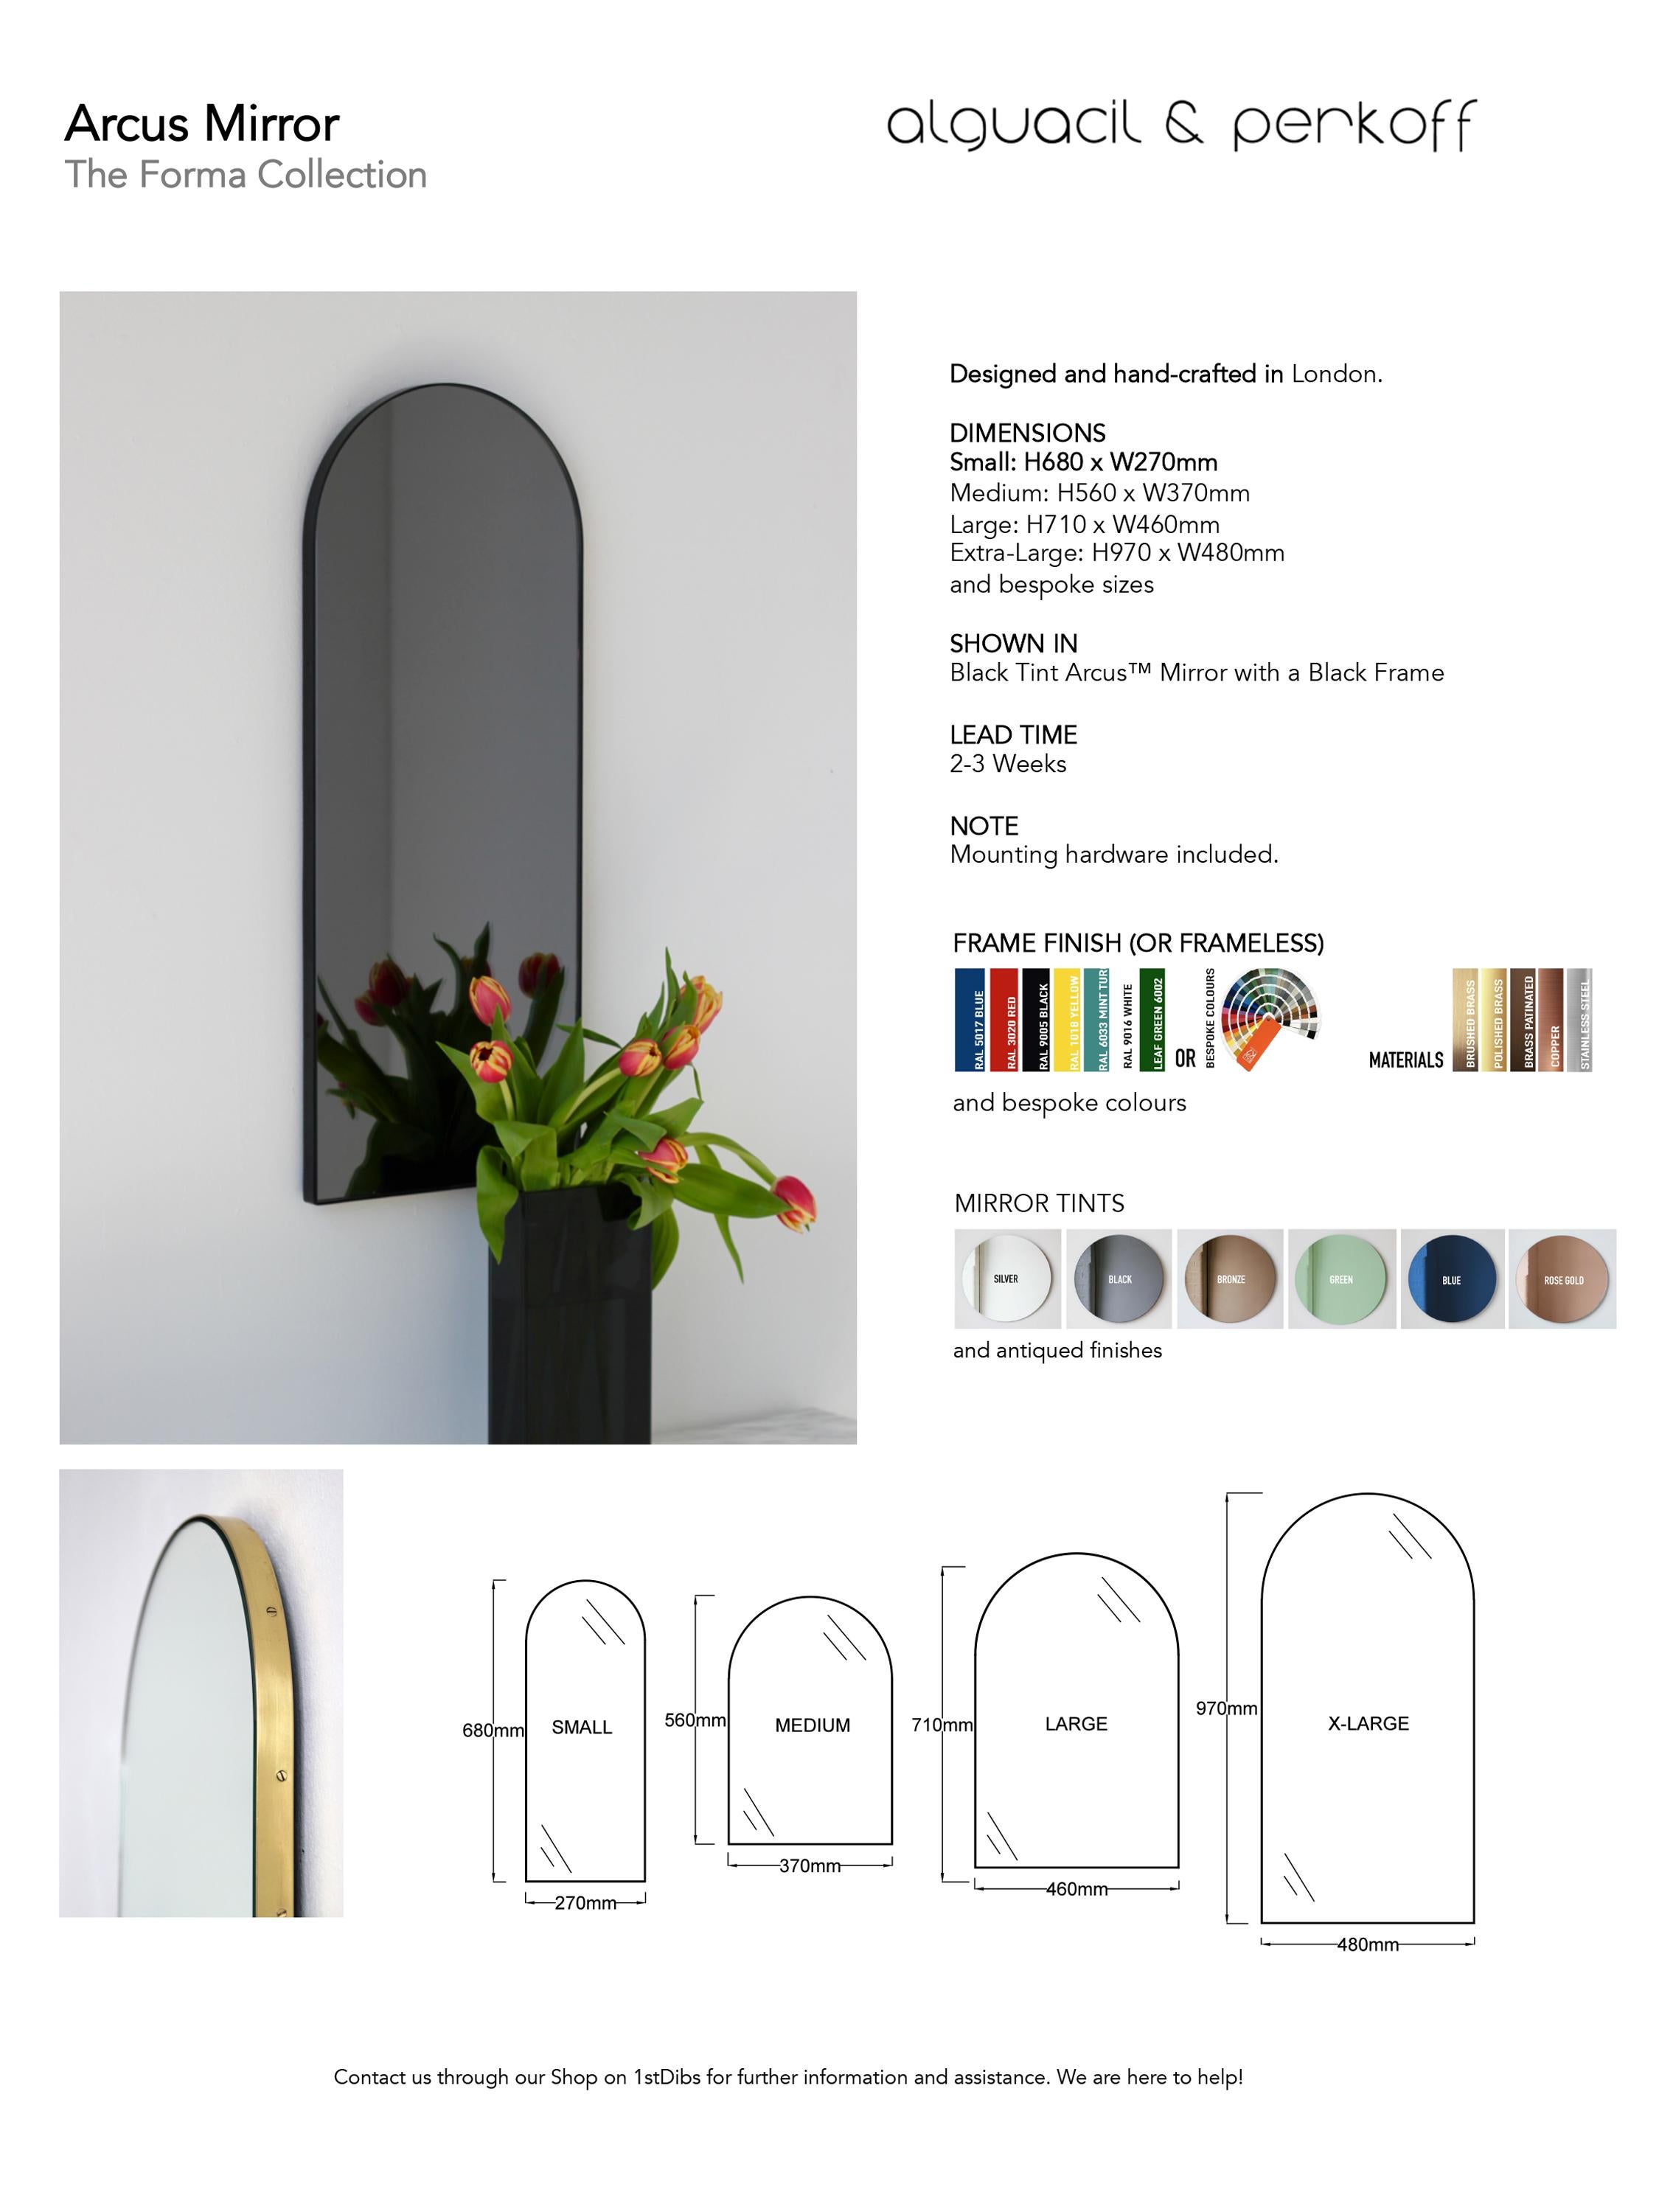 Arcus Arch shaped Contemporary Modern Versatile Frameless Mirror, Large For Sale 7